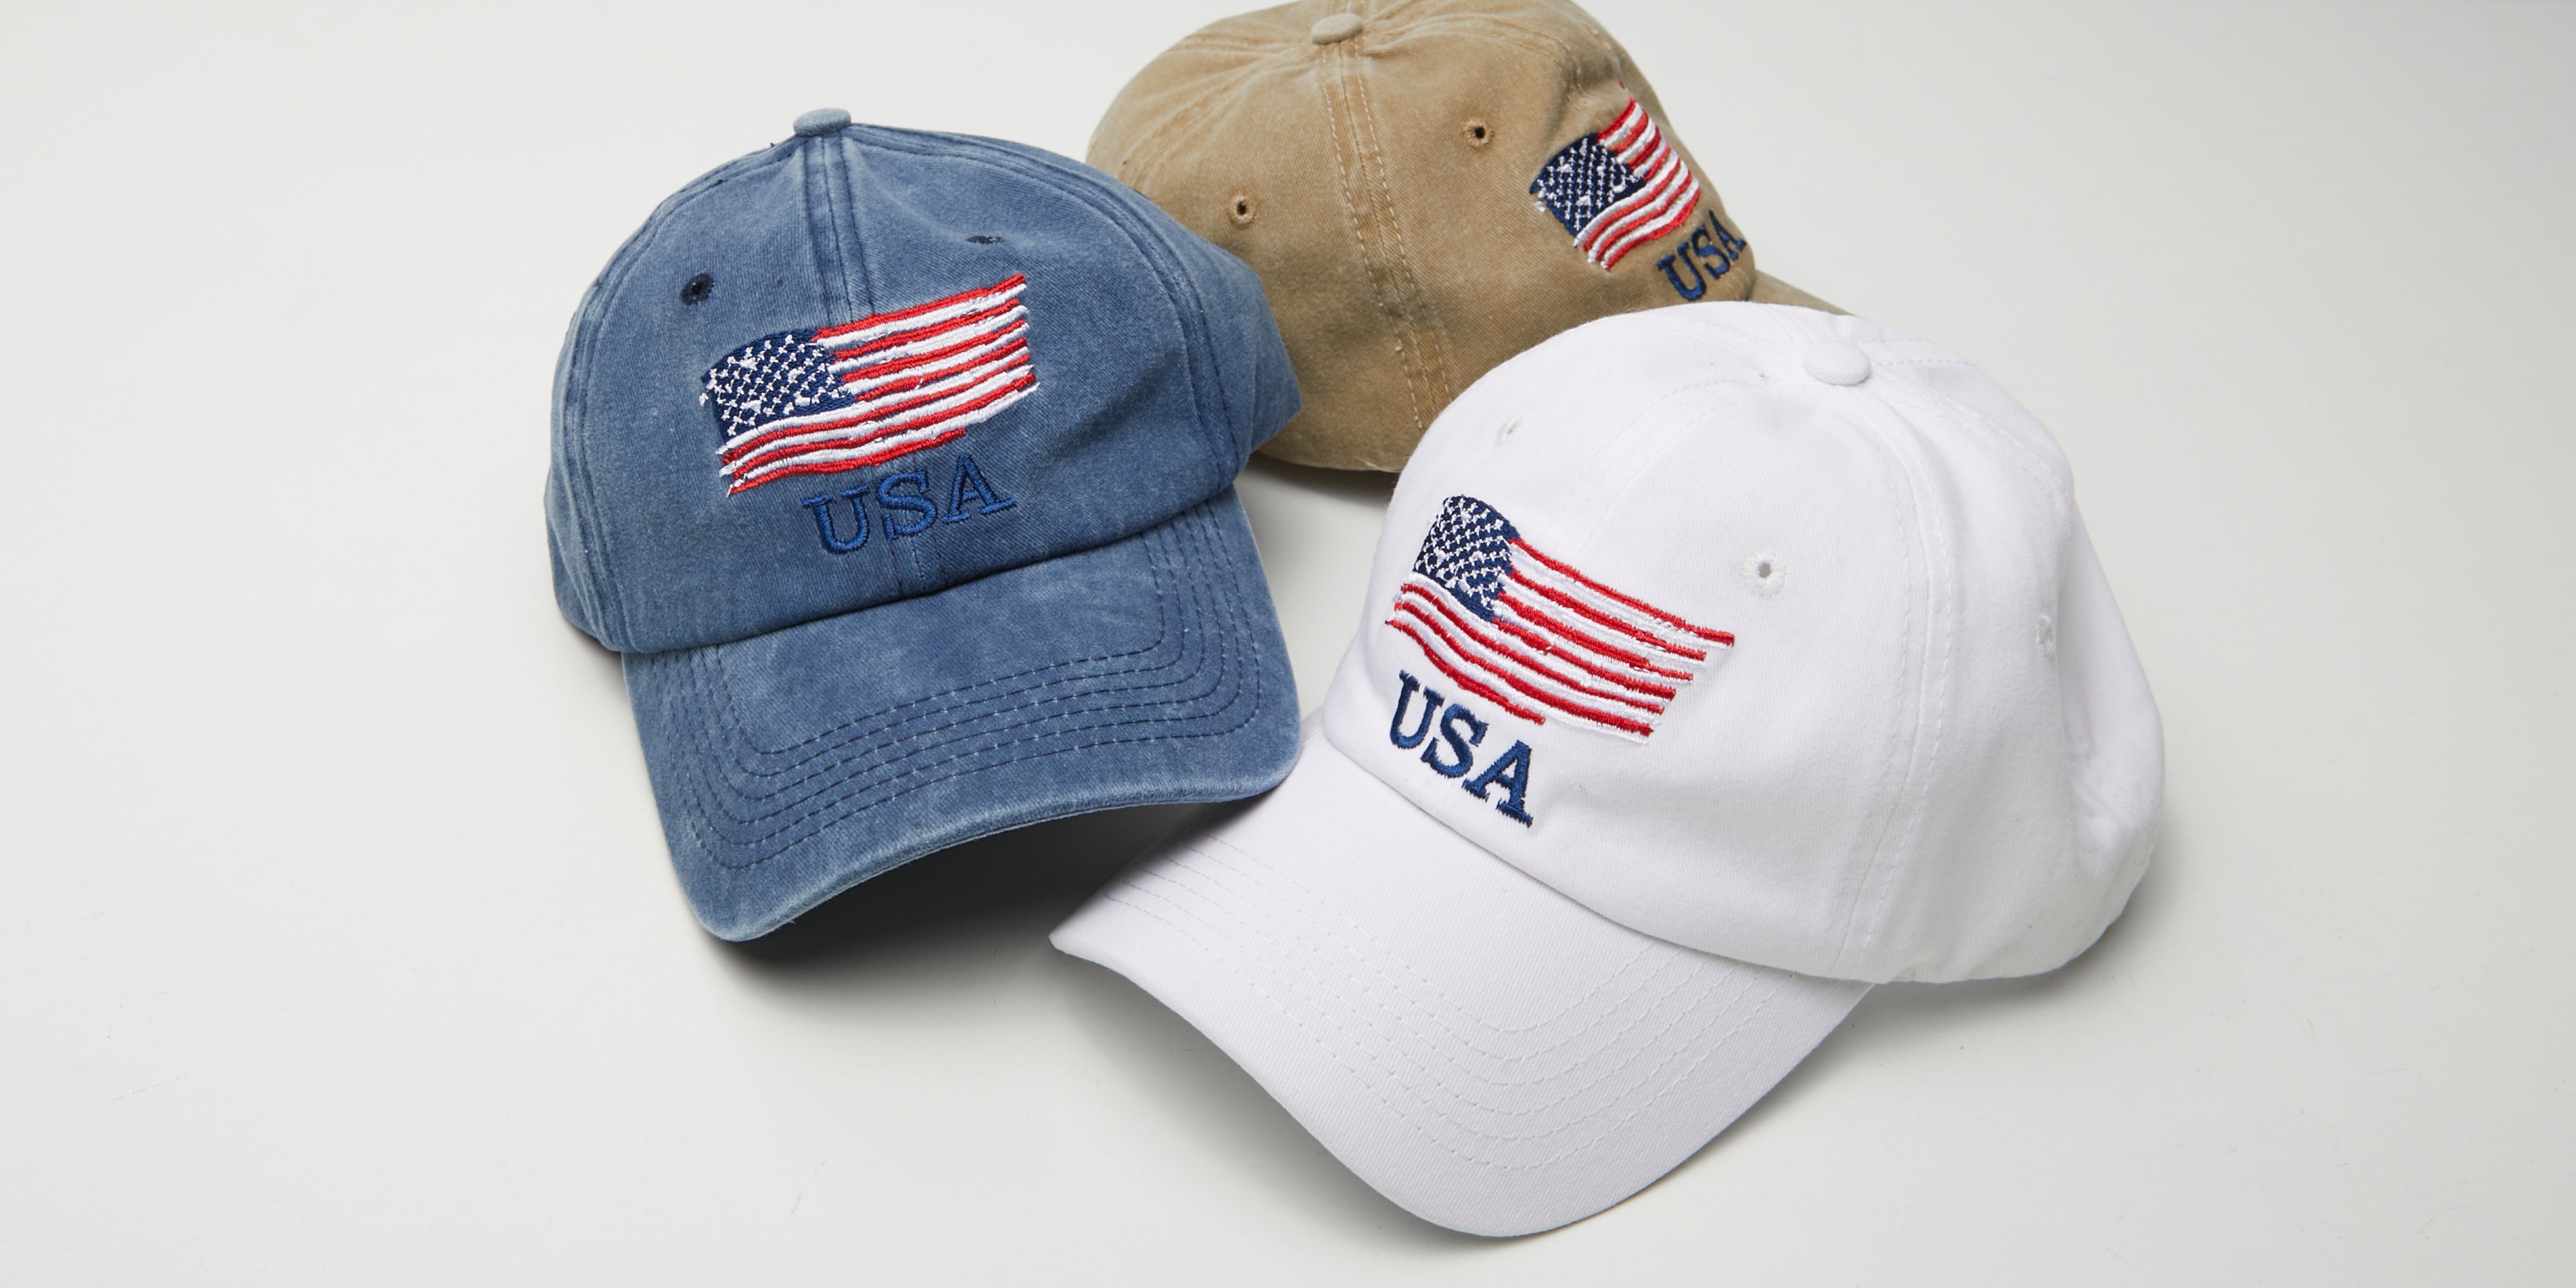 American-Flag Baseball Caps 100% Distressed Cotton Embroidered for